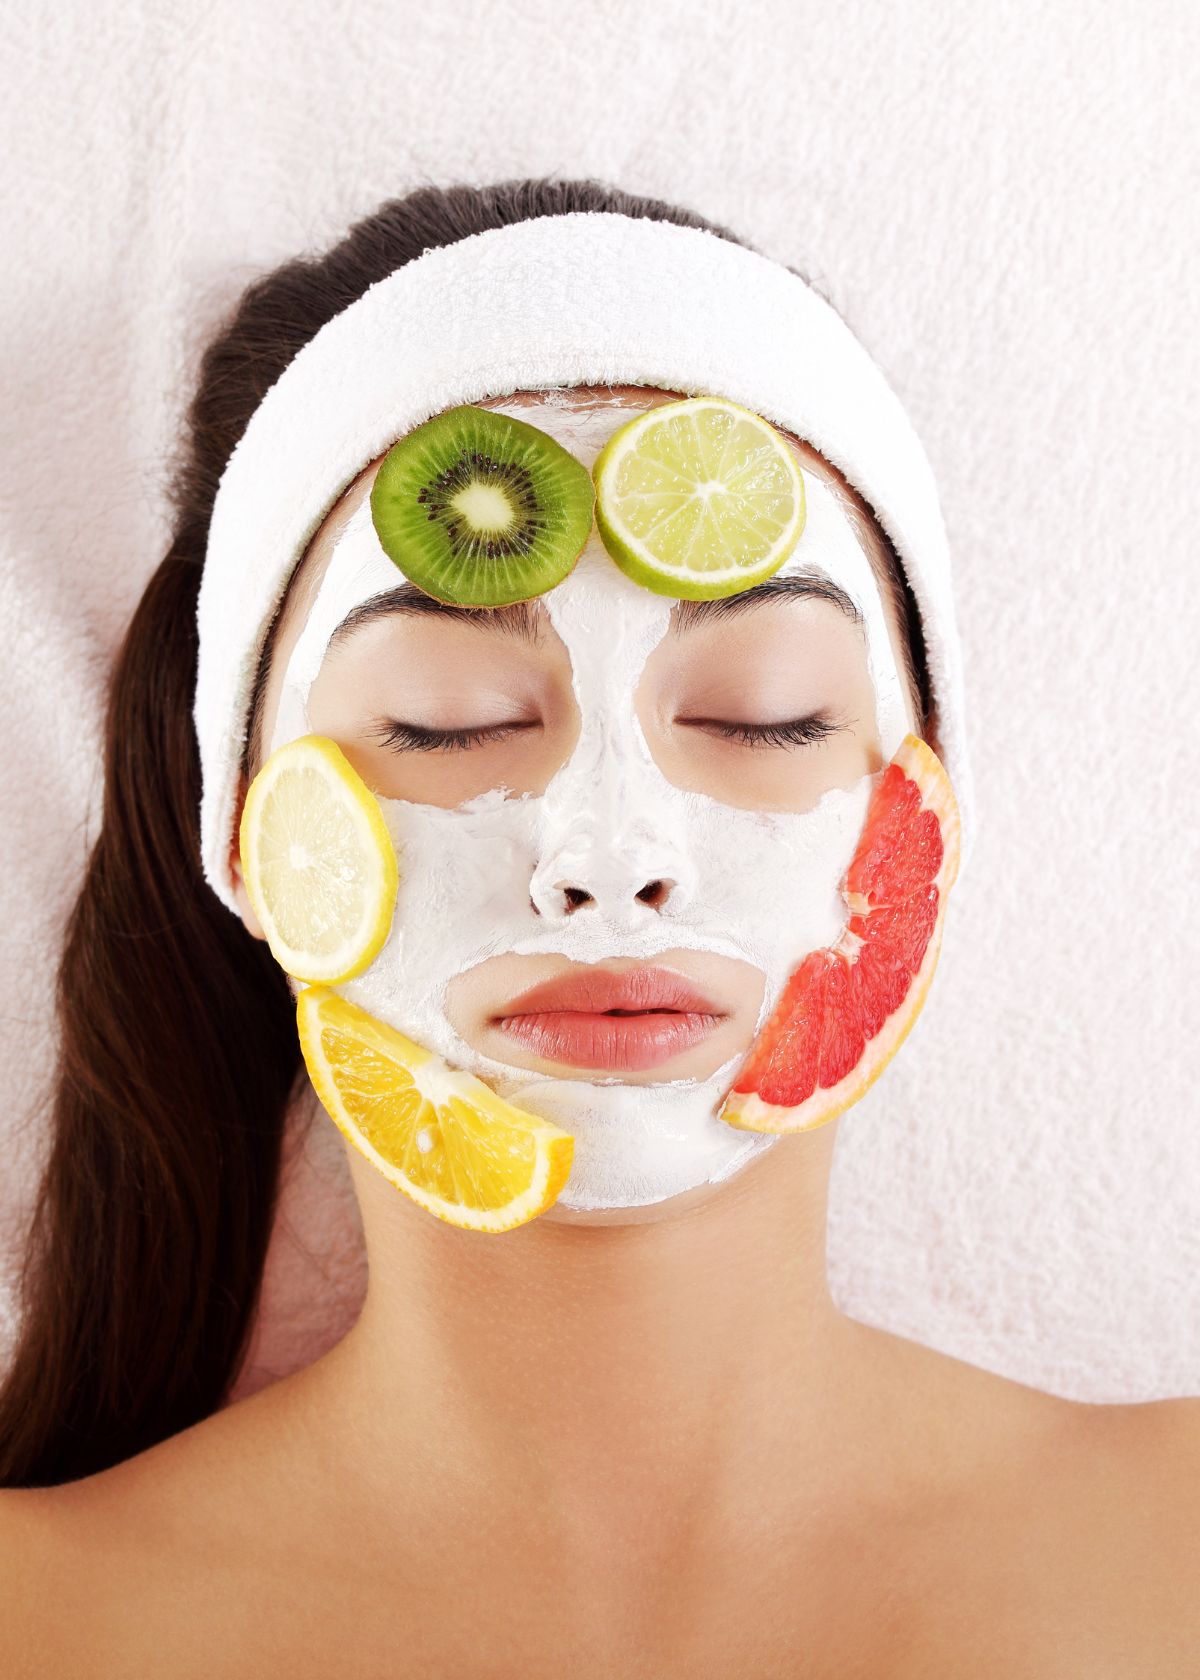 When Is The Best Time To Do A Face Mask?